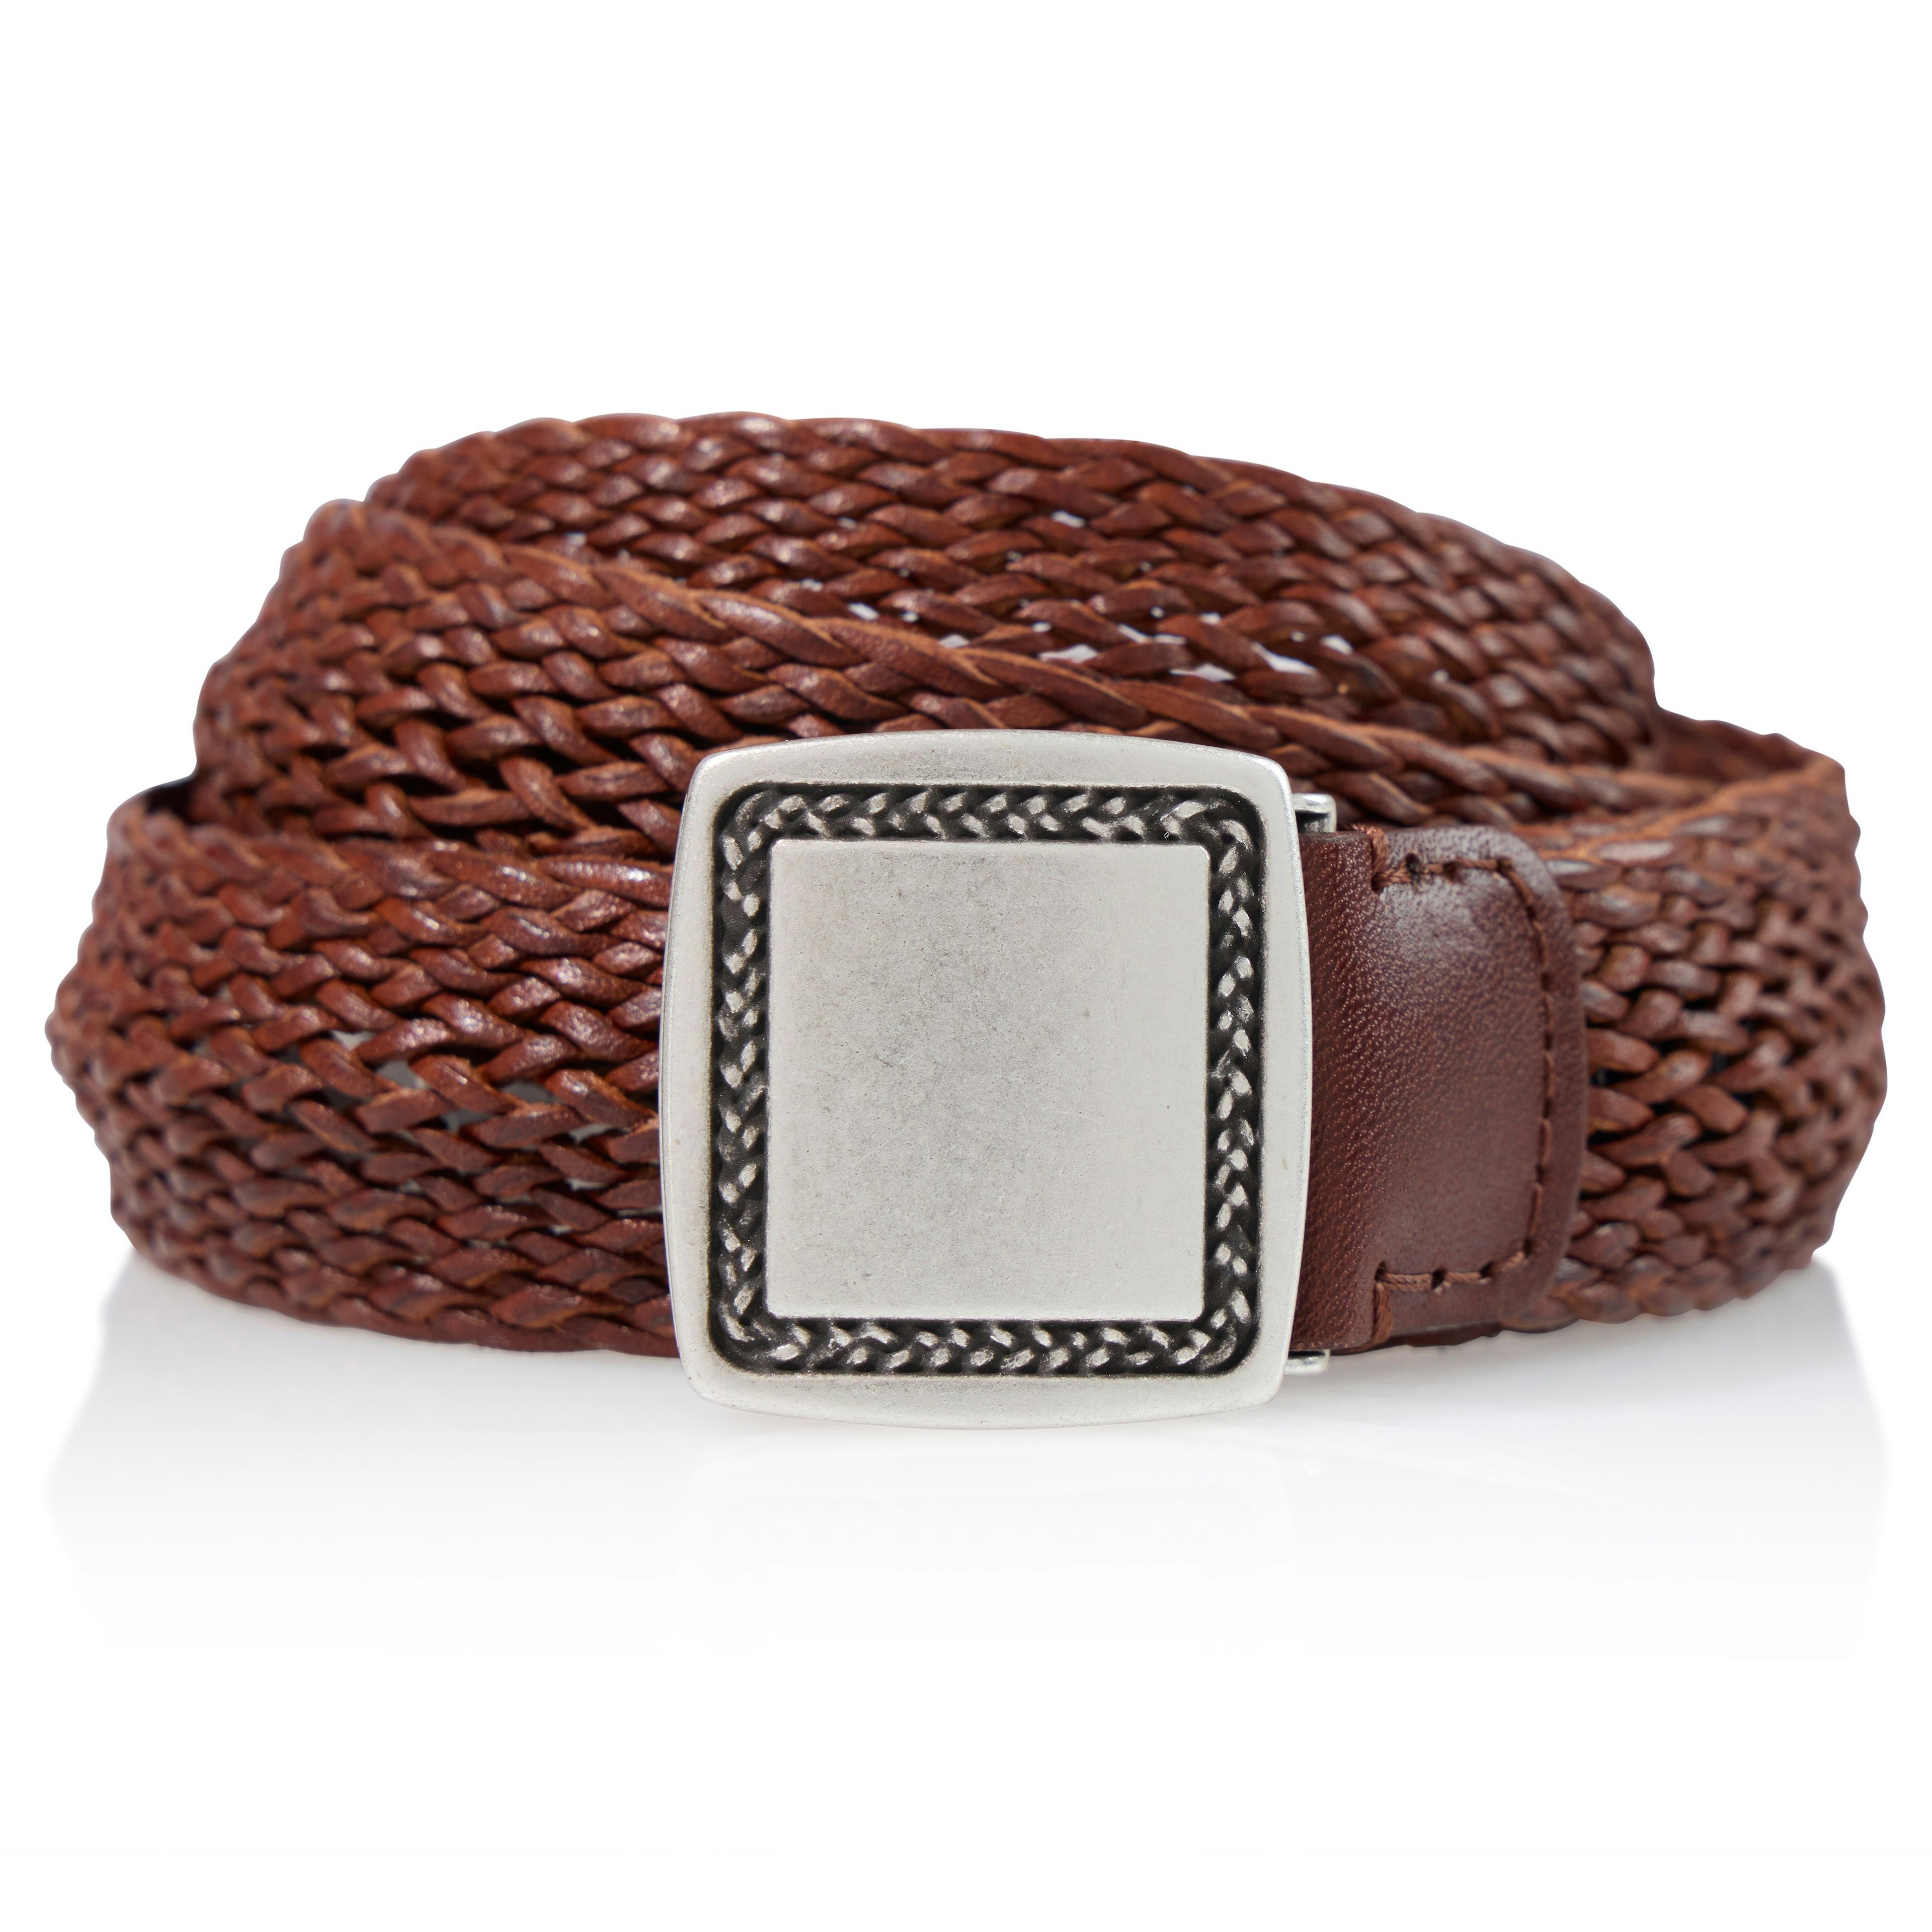 ANDERSON'S Textured-leather belt